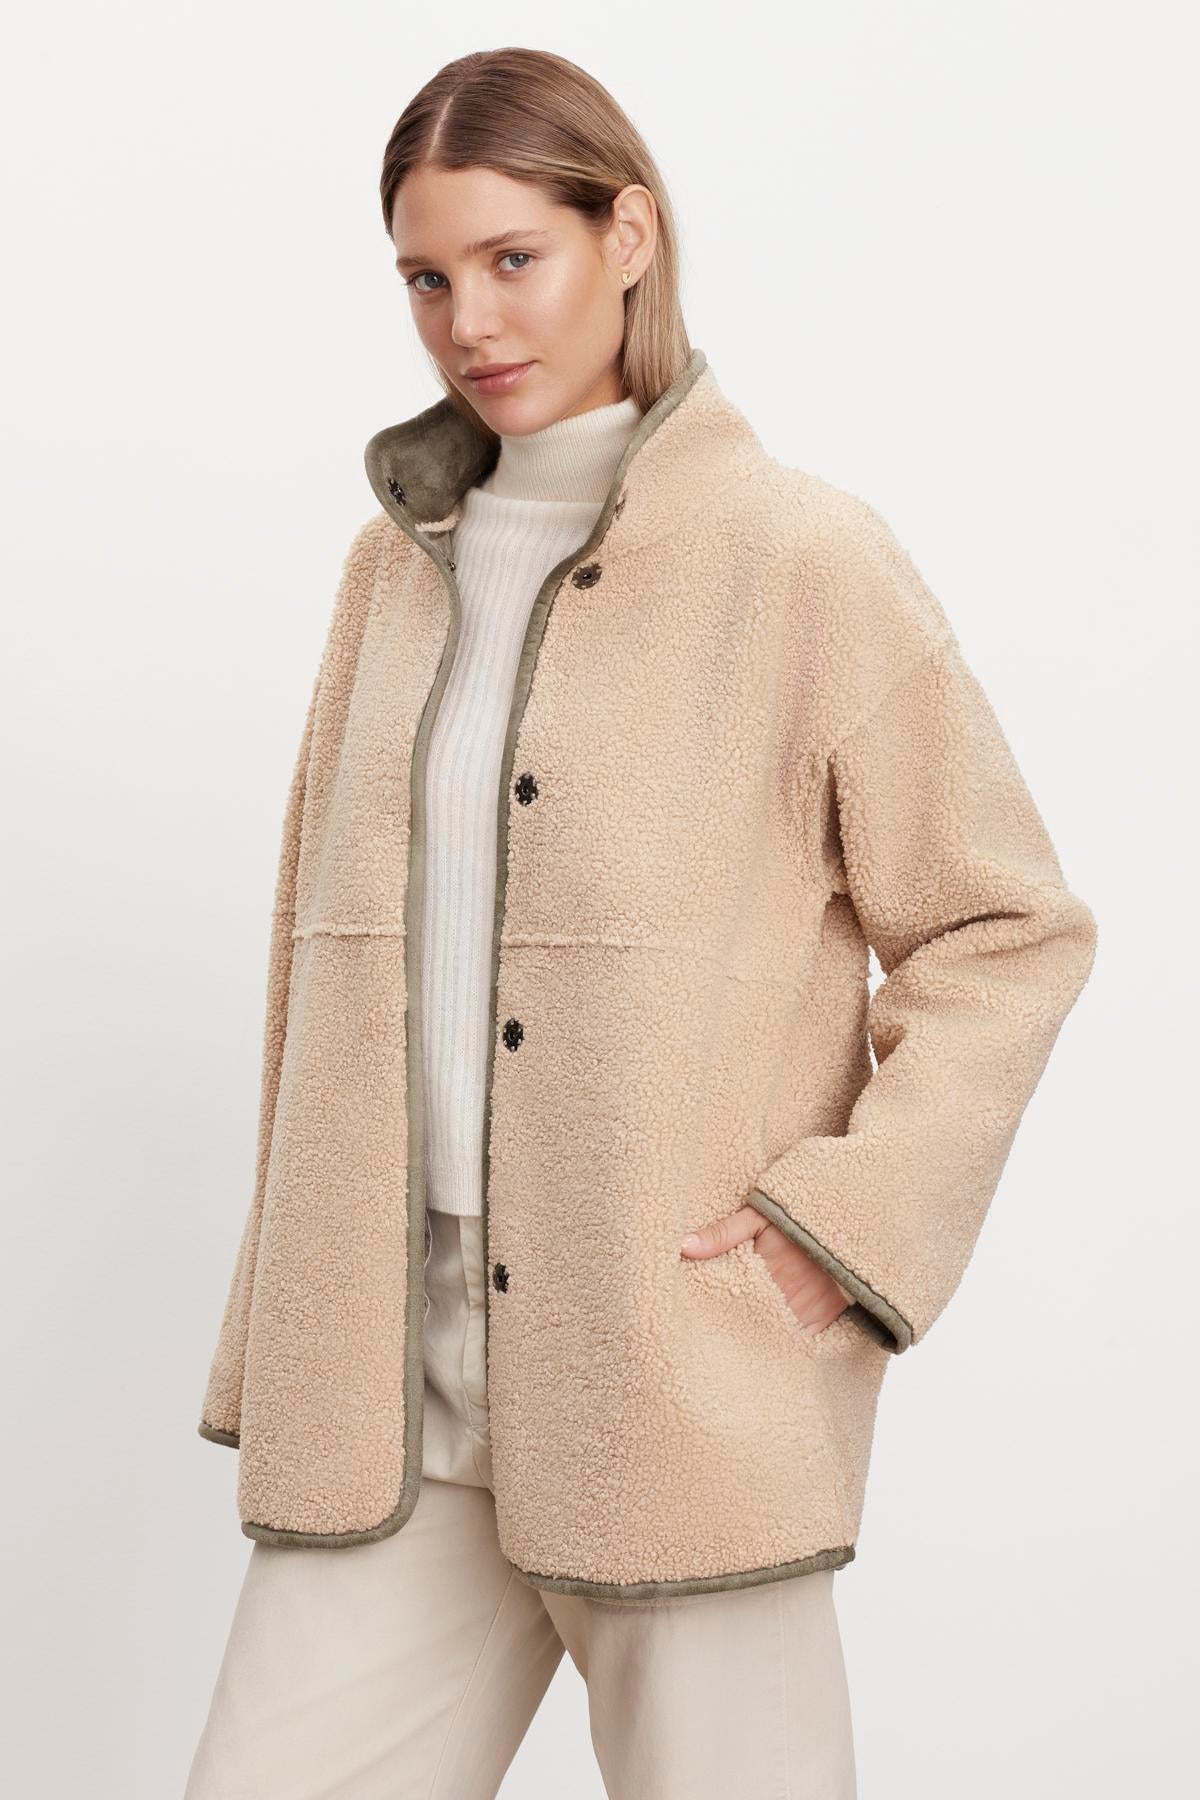 The model is wearing a beige ALBANY LUX SHERPA REVERSIBLE JACKET by Velvet by Graham & Spencer.-35582397087937